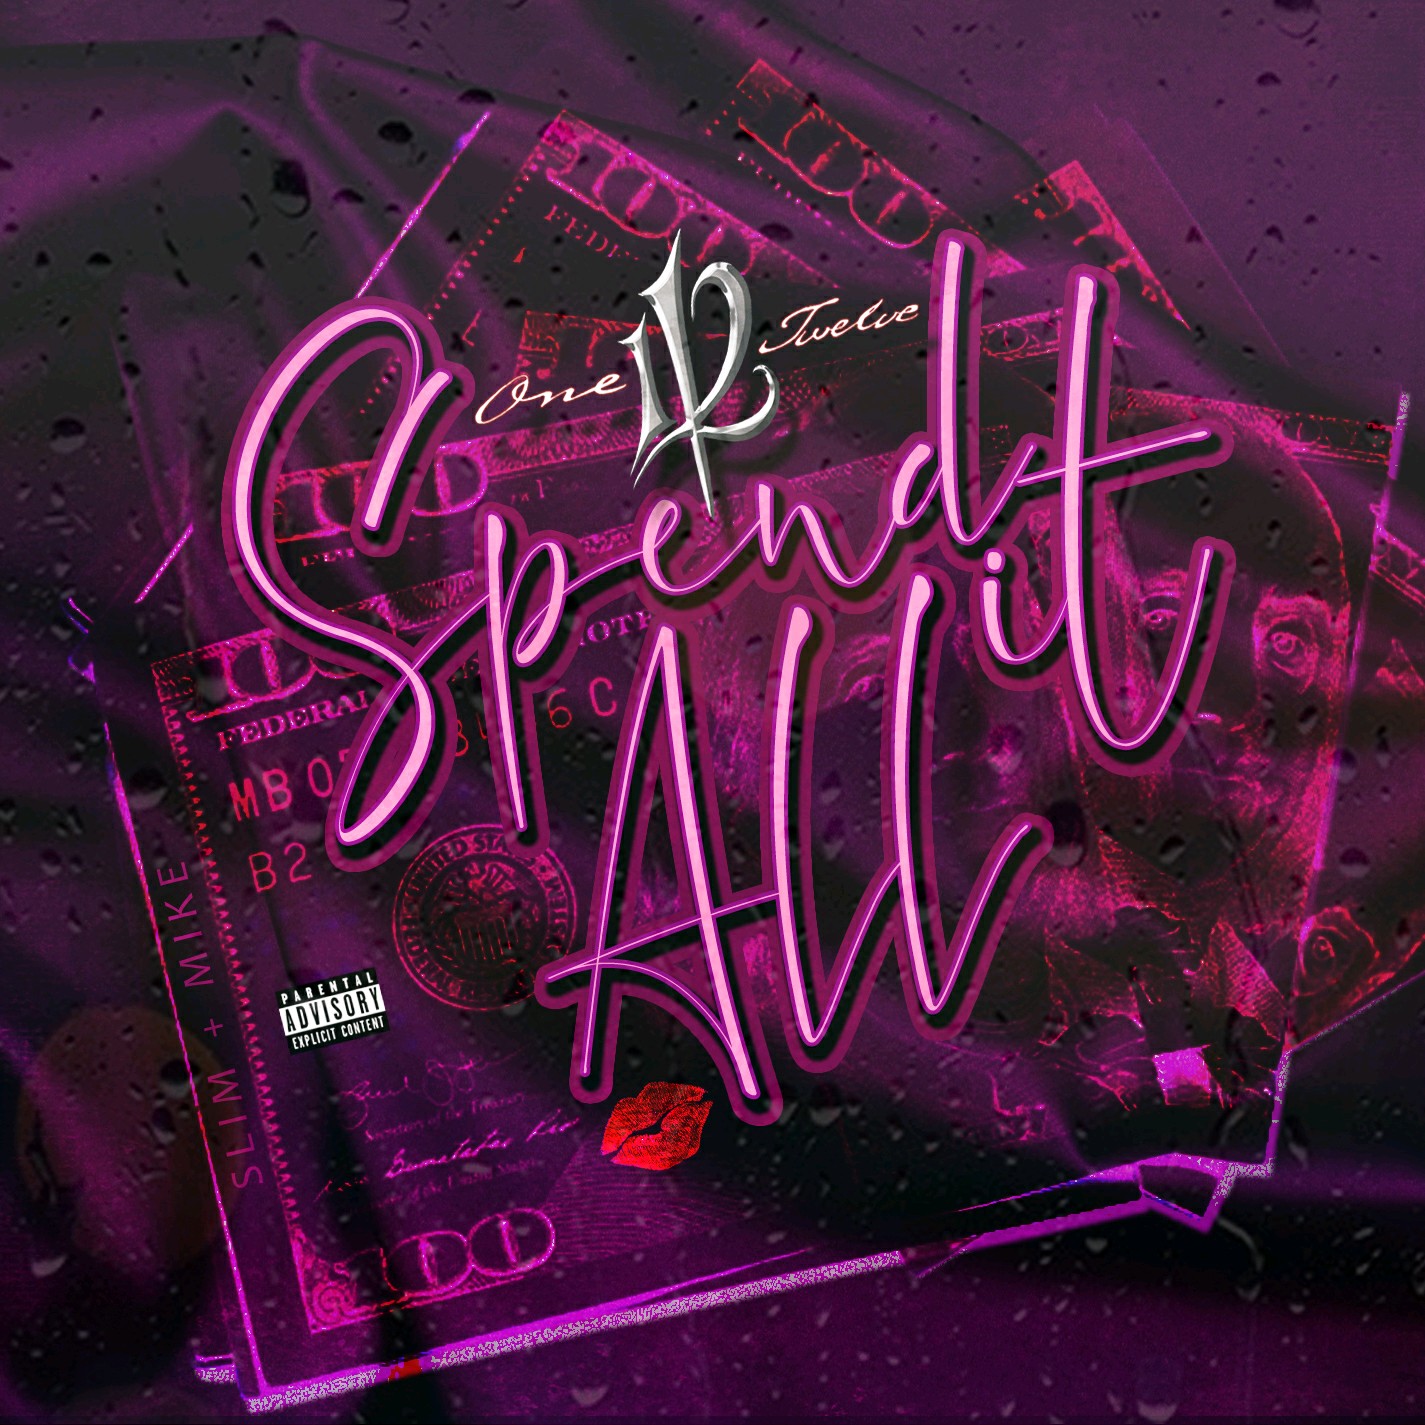 112 To Release New Single "Spend it All" This Month + Announce "112 Forever: Slim & Mike" EP